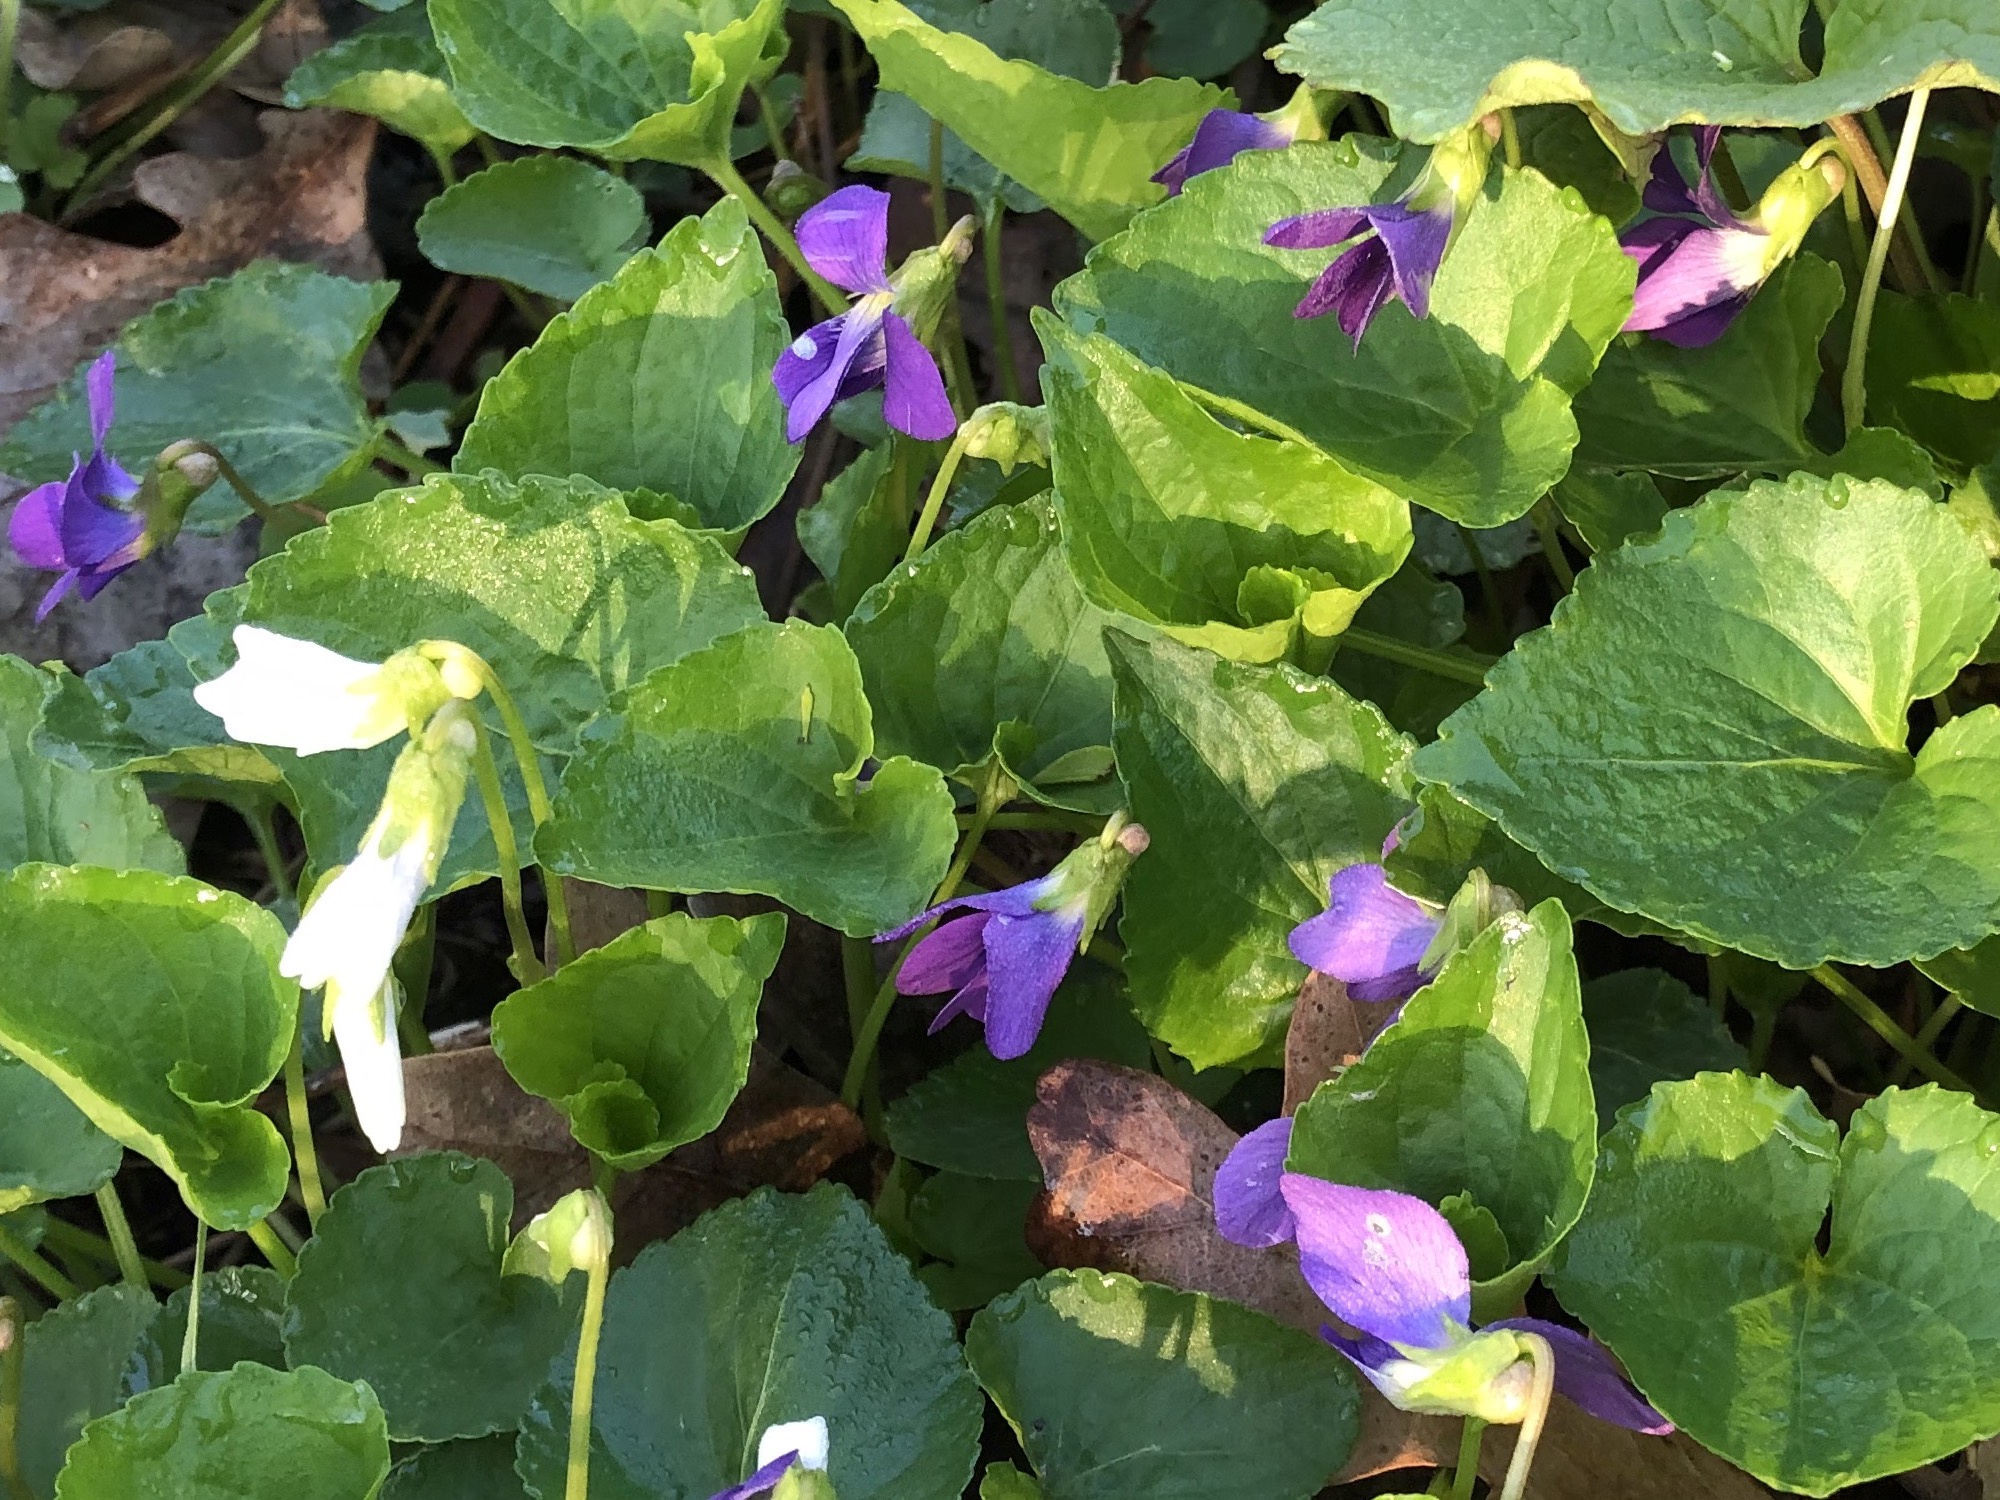 Wood Violets near Council Ring, the Oak Savanna and the Duck Pond on May 3, 2019.